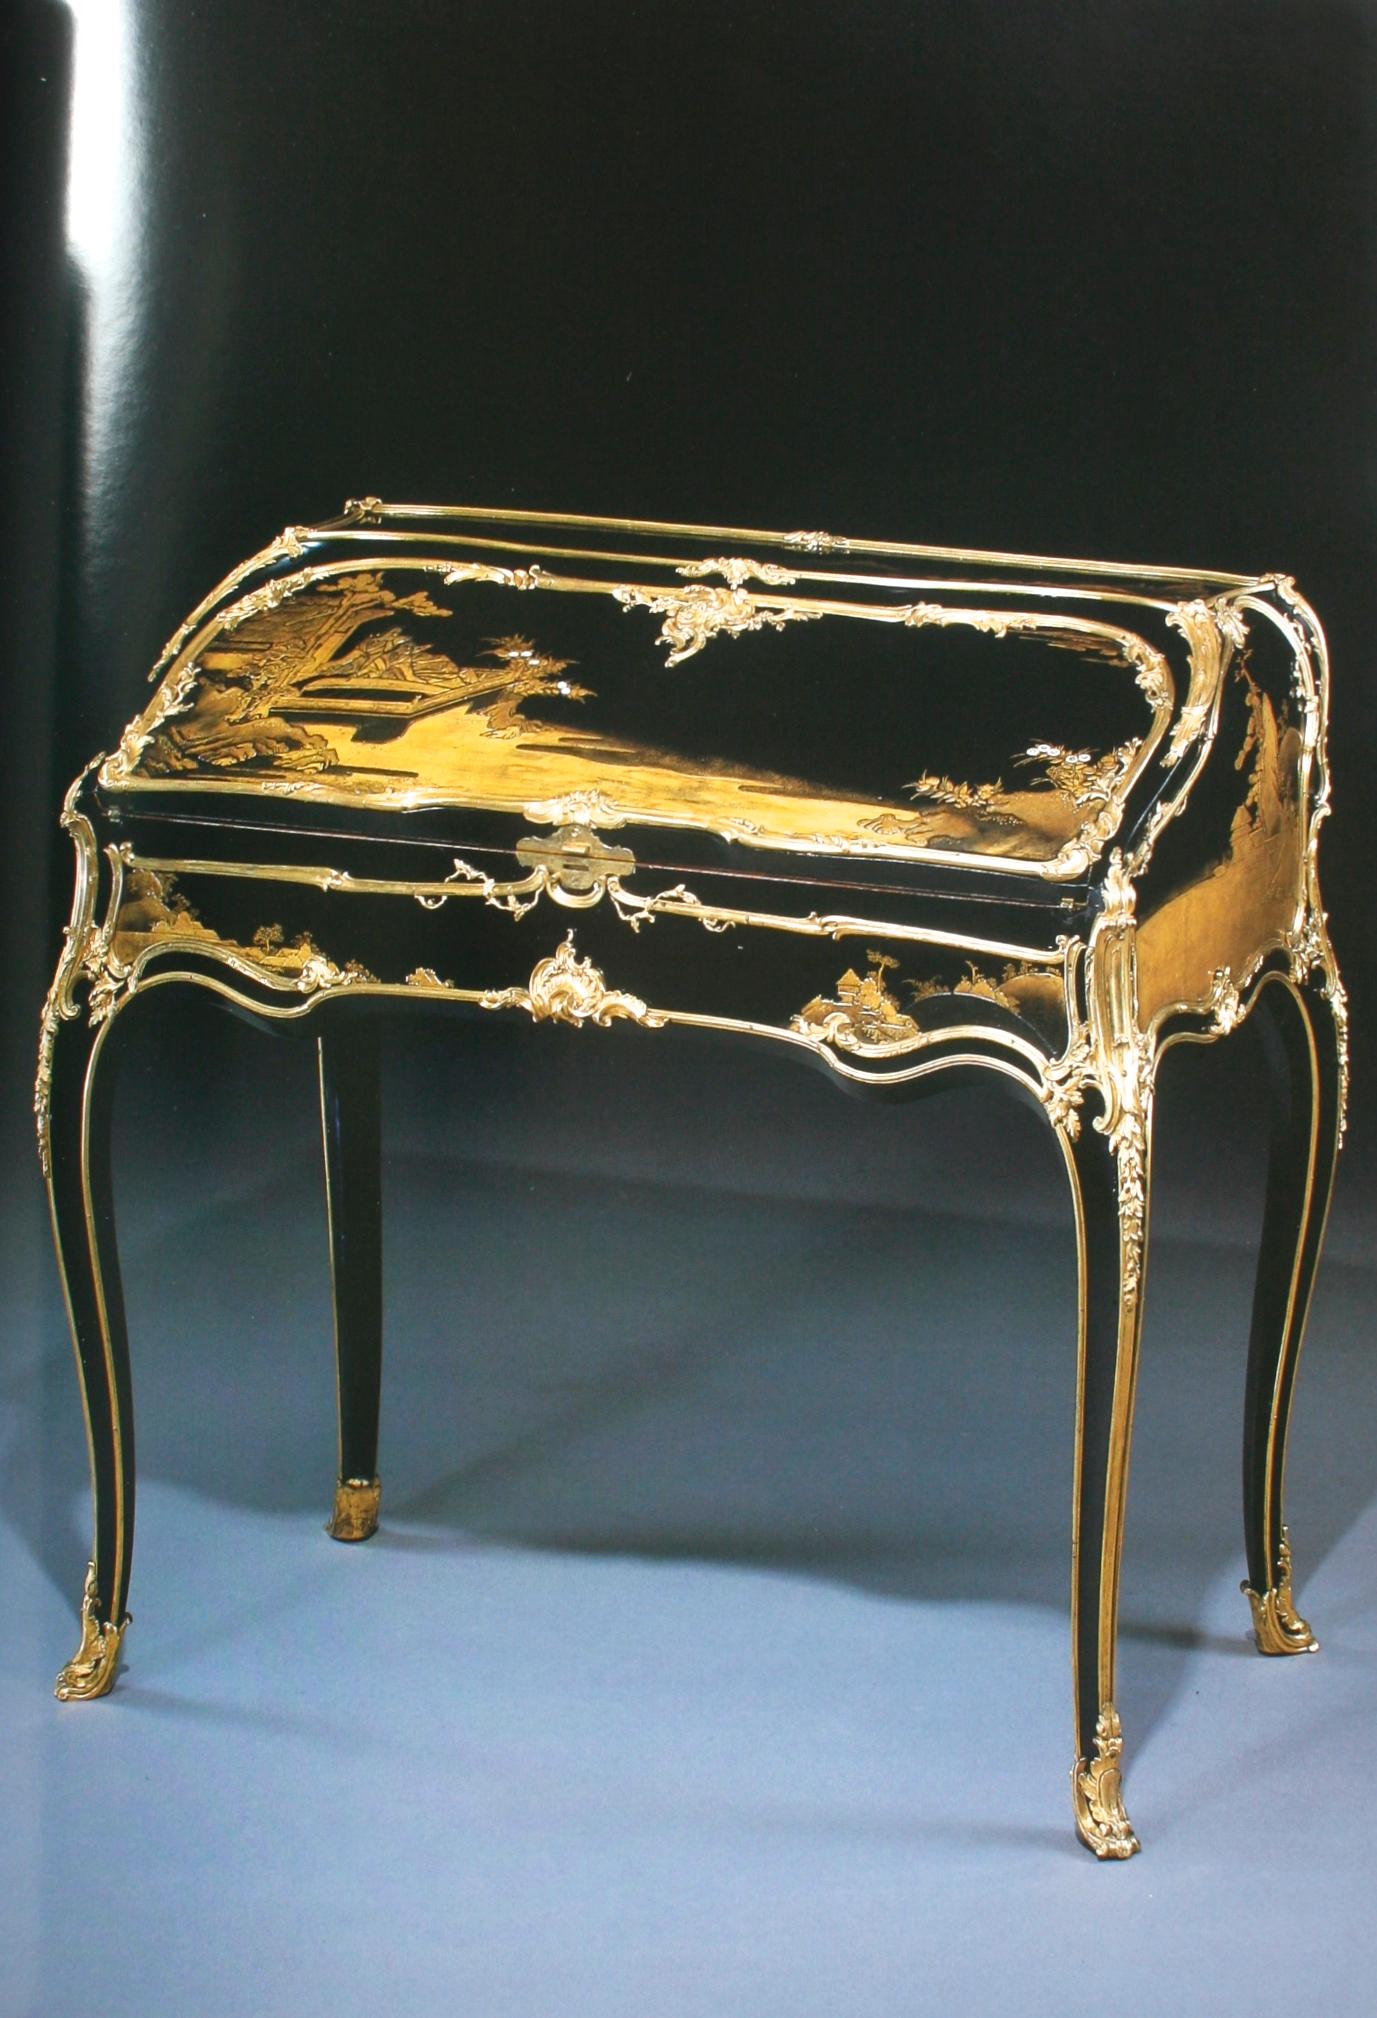 Paper Christie's, ‎French and Company Magnificent French and English Furniture 11/1998 For Sale